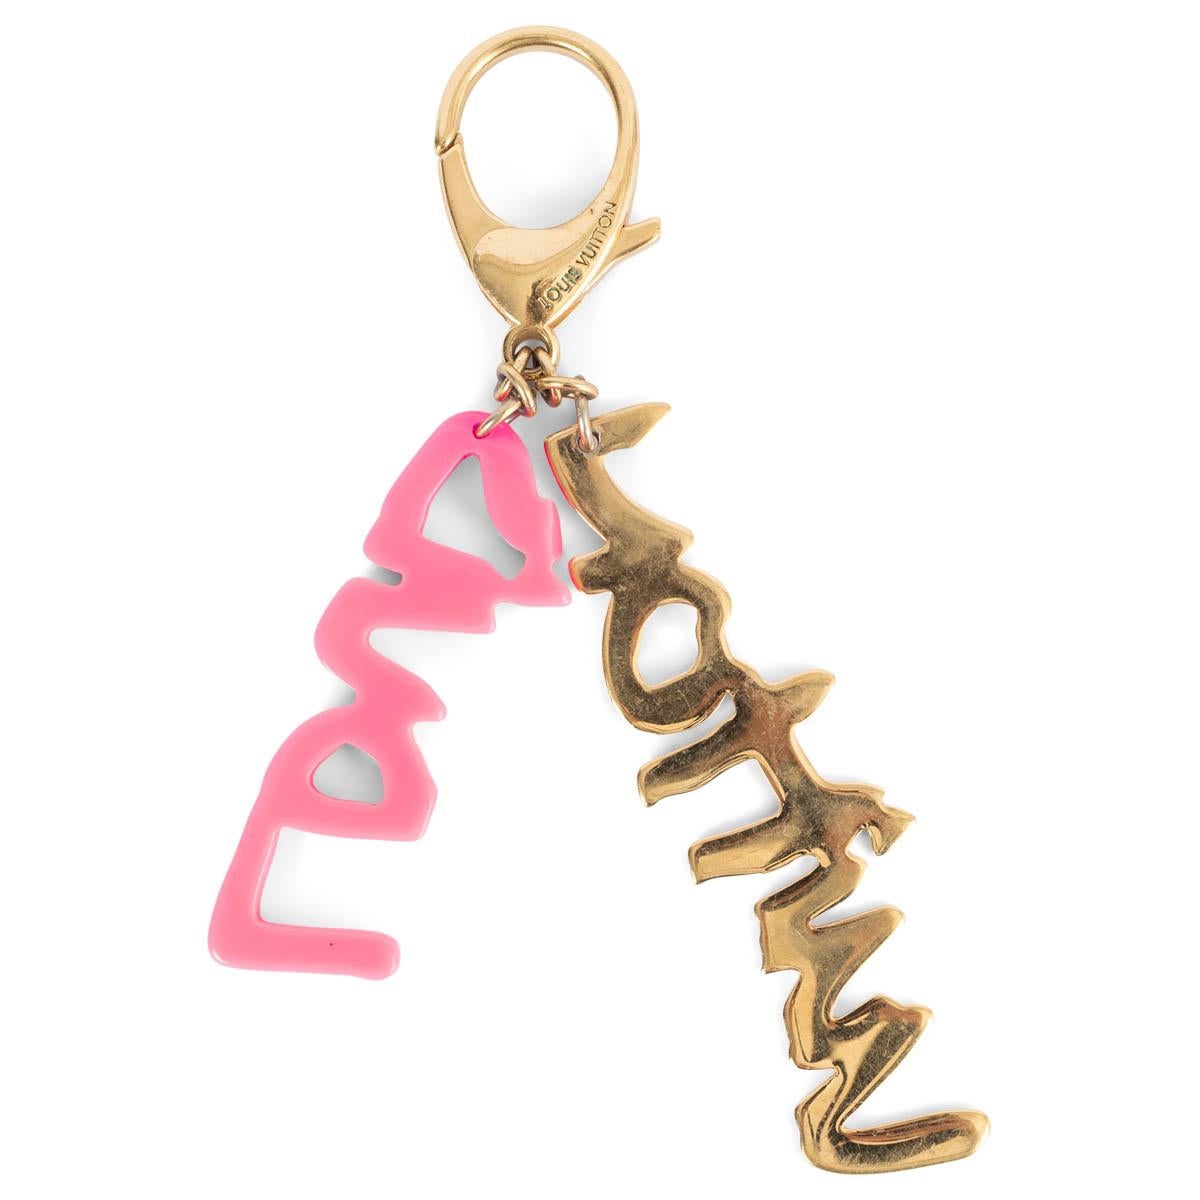 100% authentic Louis Vuitton limited edition Graffiti keyring by Stephan Sprouse in gold metall and neon pink resin. Has been worn and metal shows scratches throughout.

Measurements
Model	M65768
Width	4cm (1.6in)
Height	15.5cm